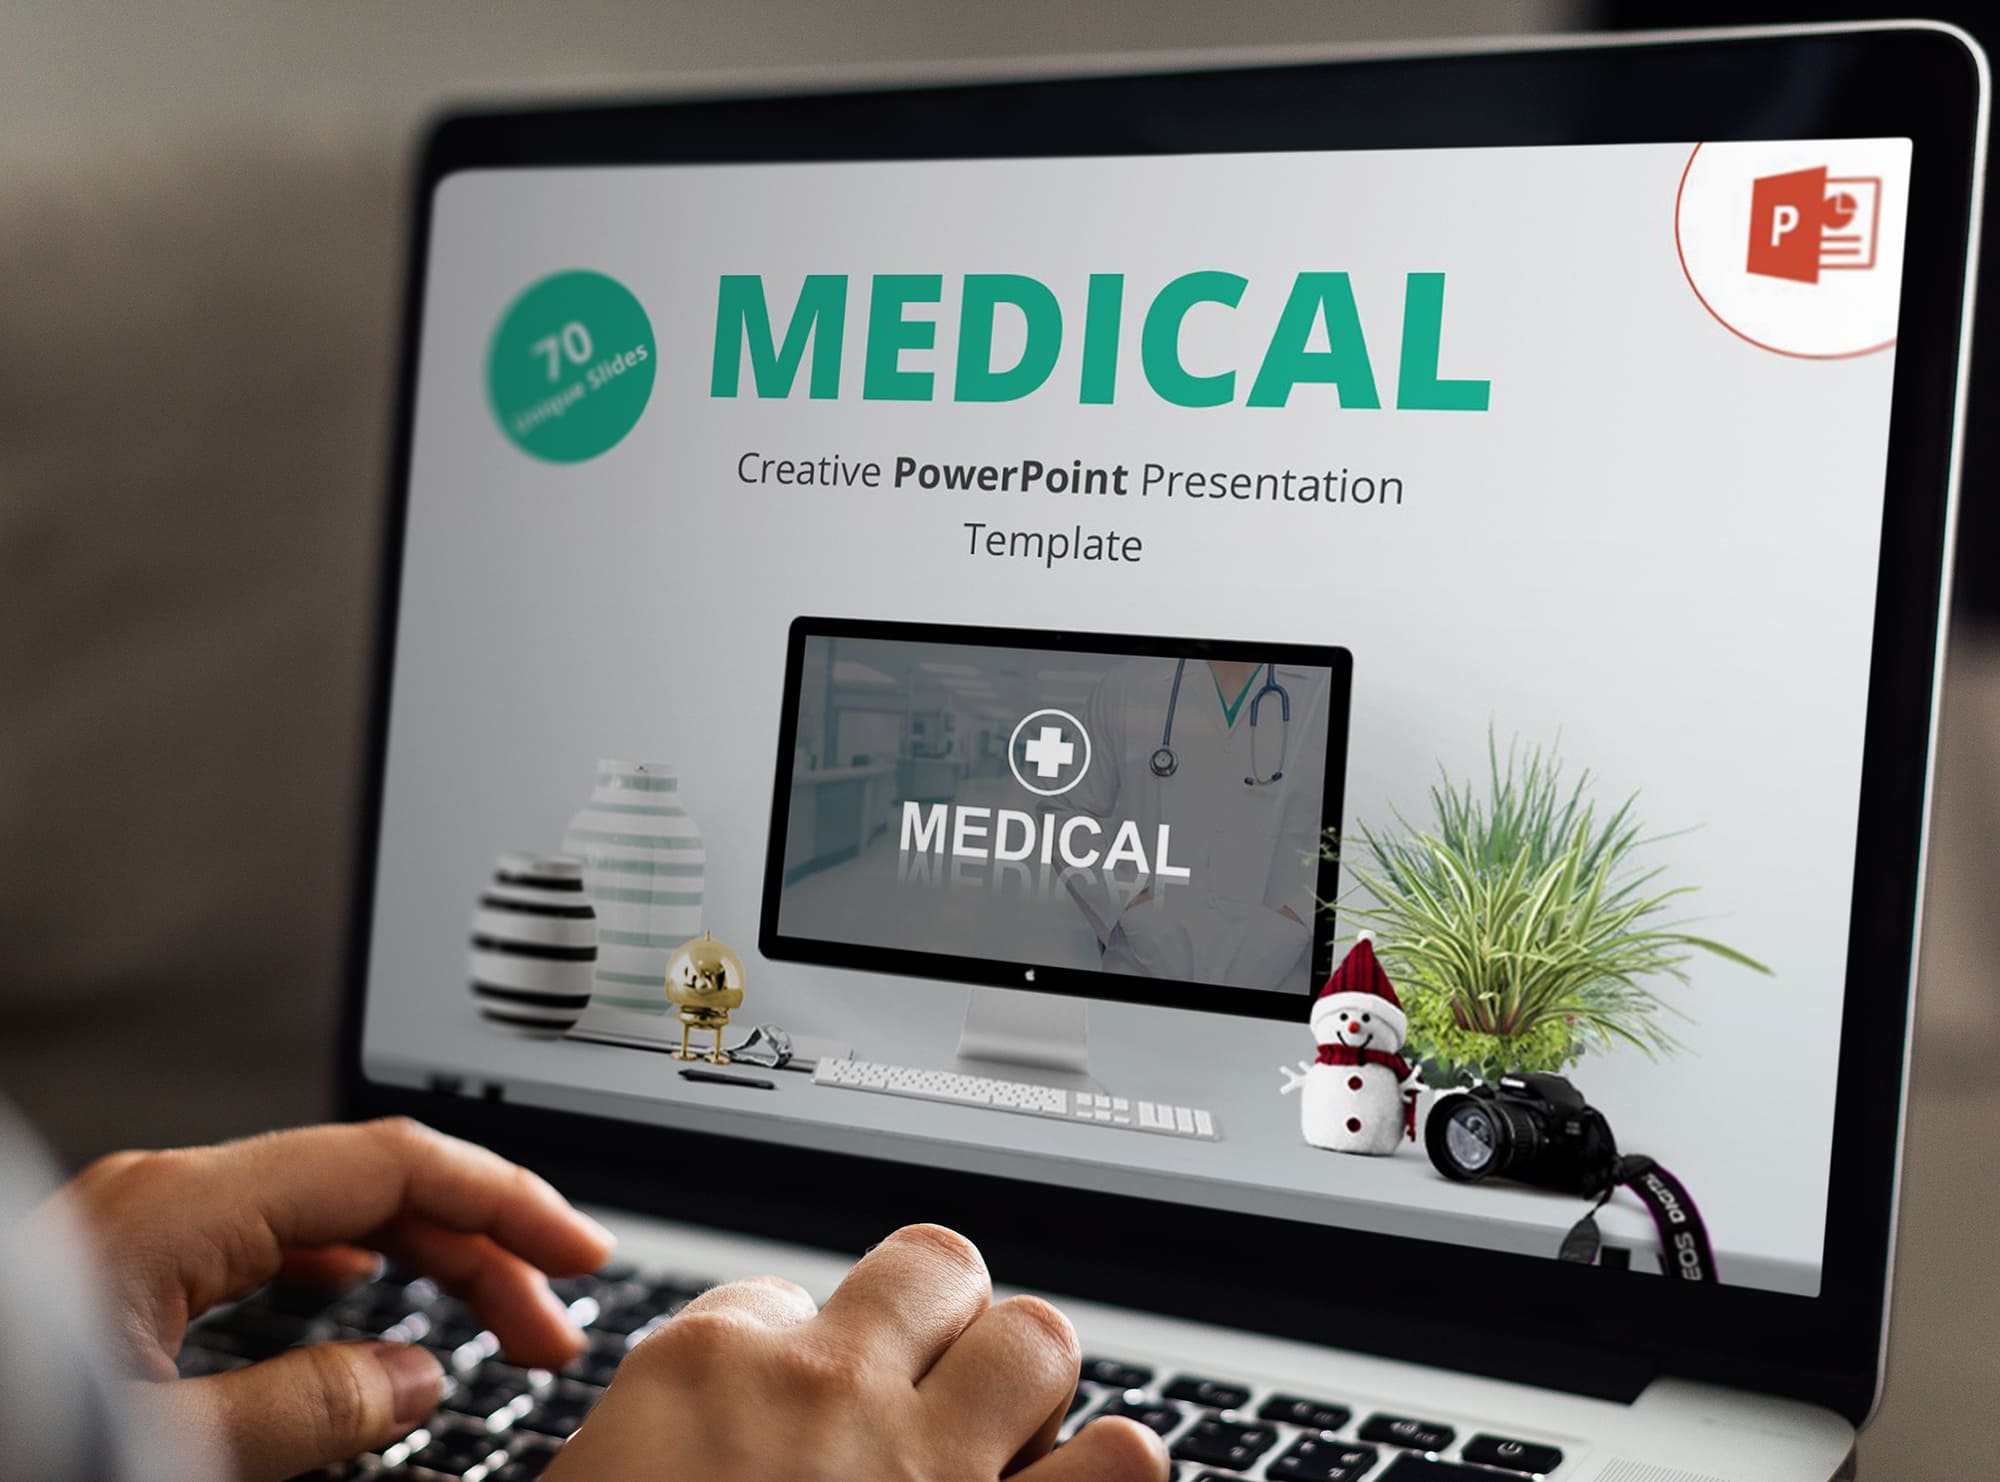 Big Laptop option of the Medical PowerPoint Template.